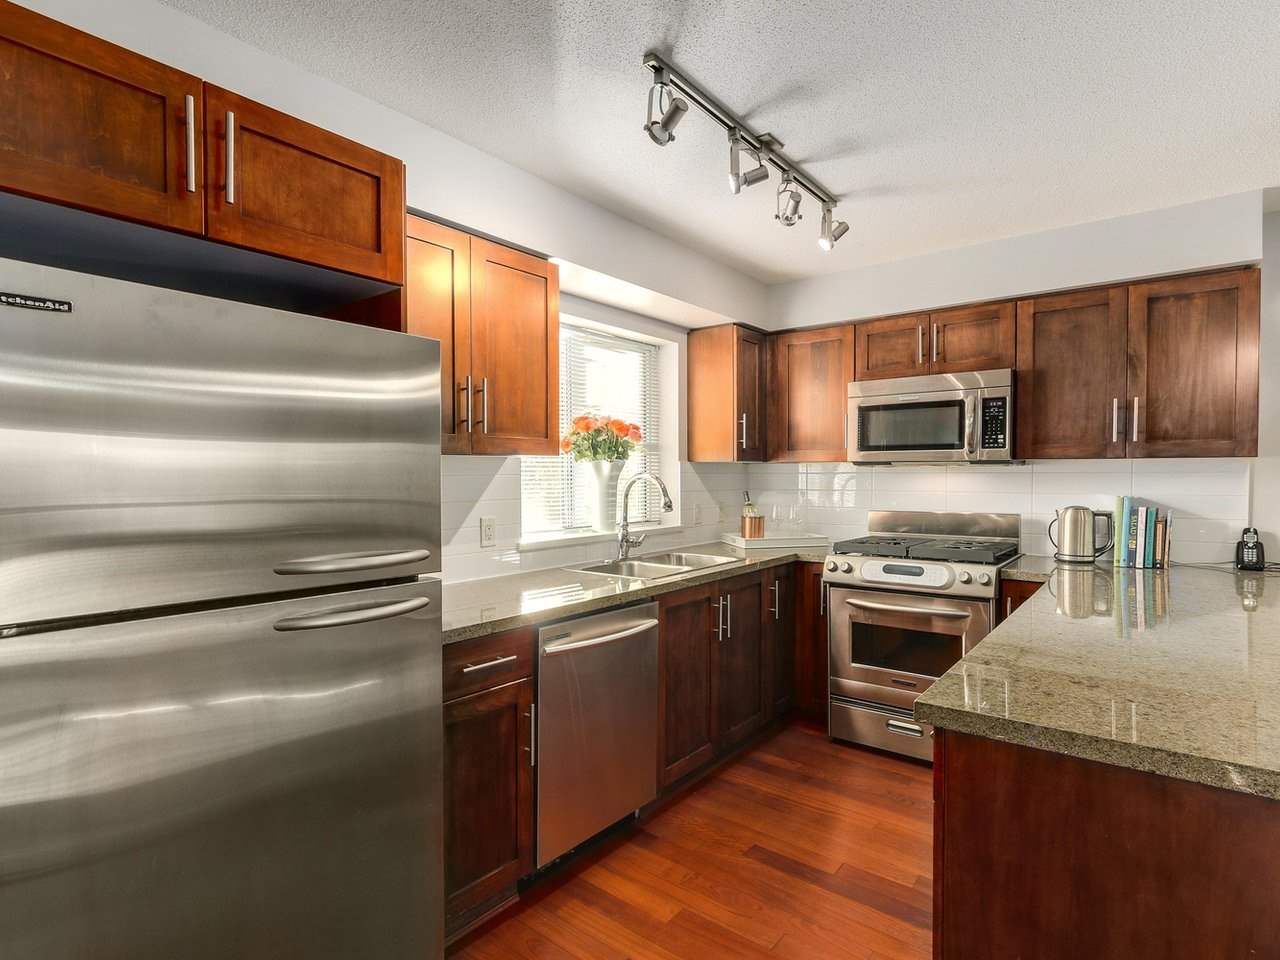 Photo 9: Photos: 119 672 W 6TH AVENUE in Vancouver: Fairview VW Townhouse for sale (Vancouver West)  : MLS®# R2401186